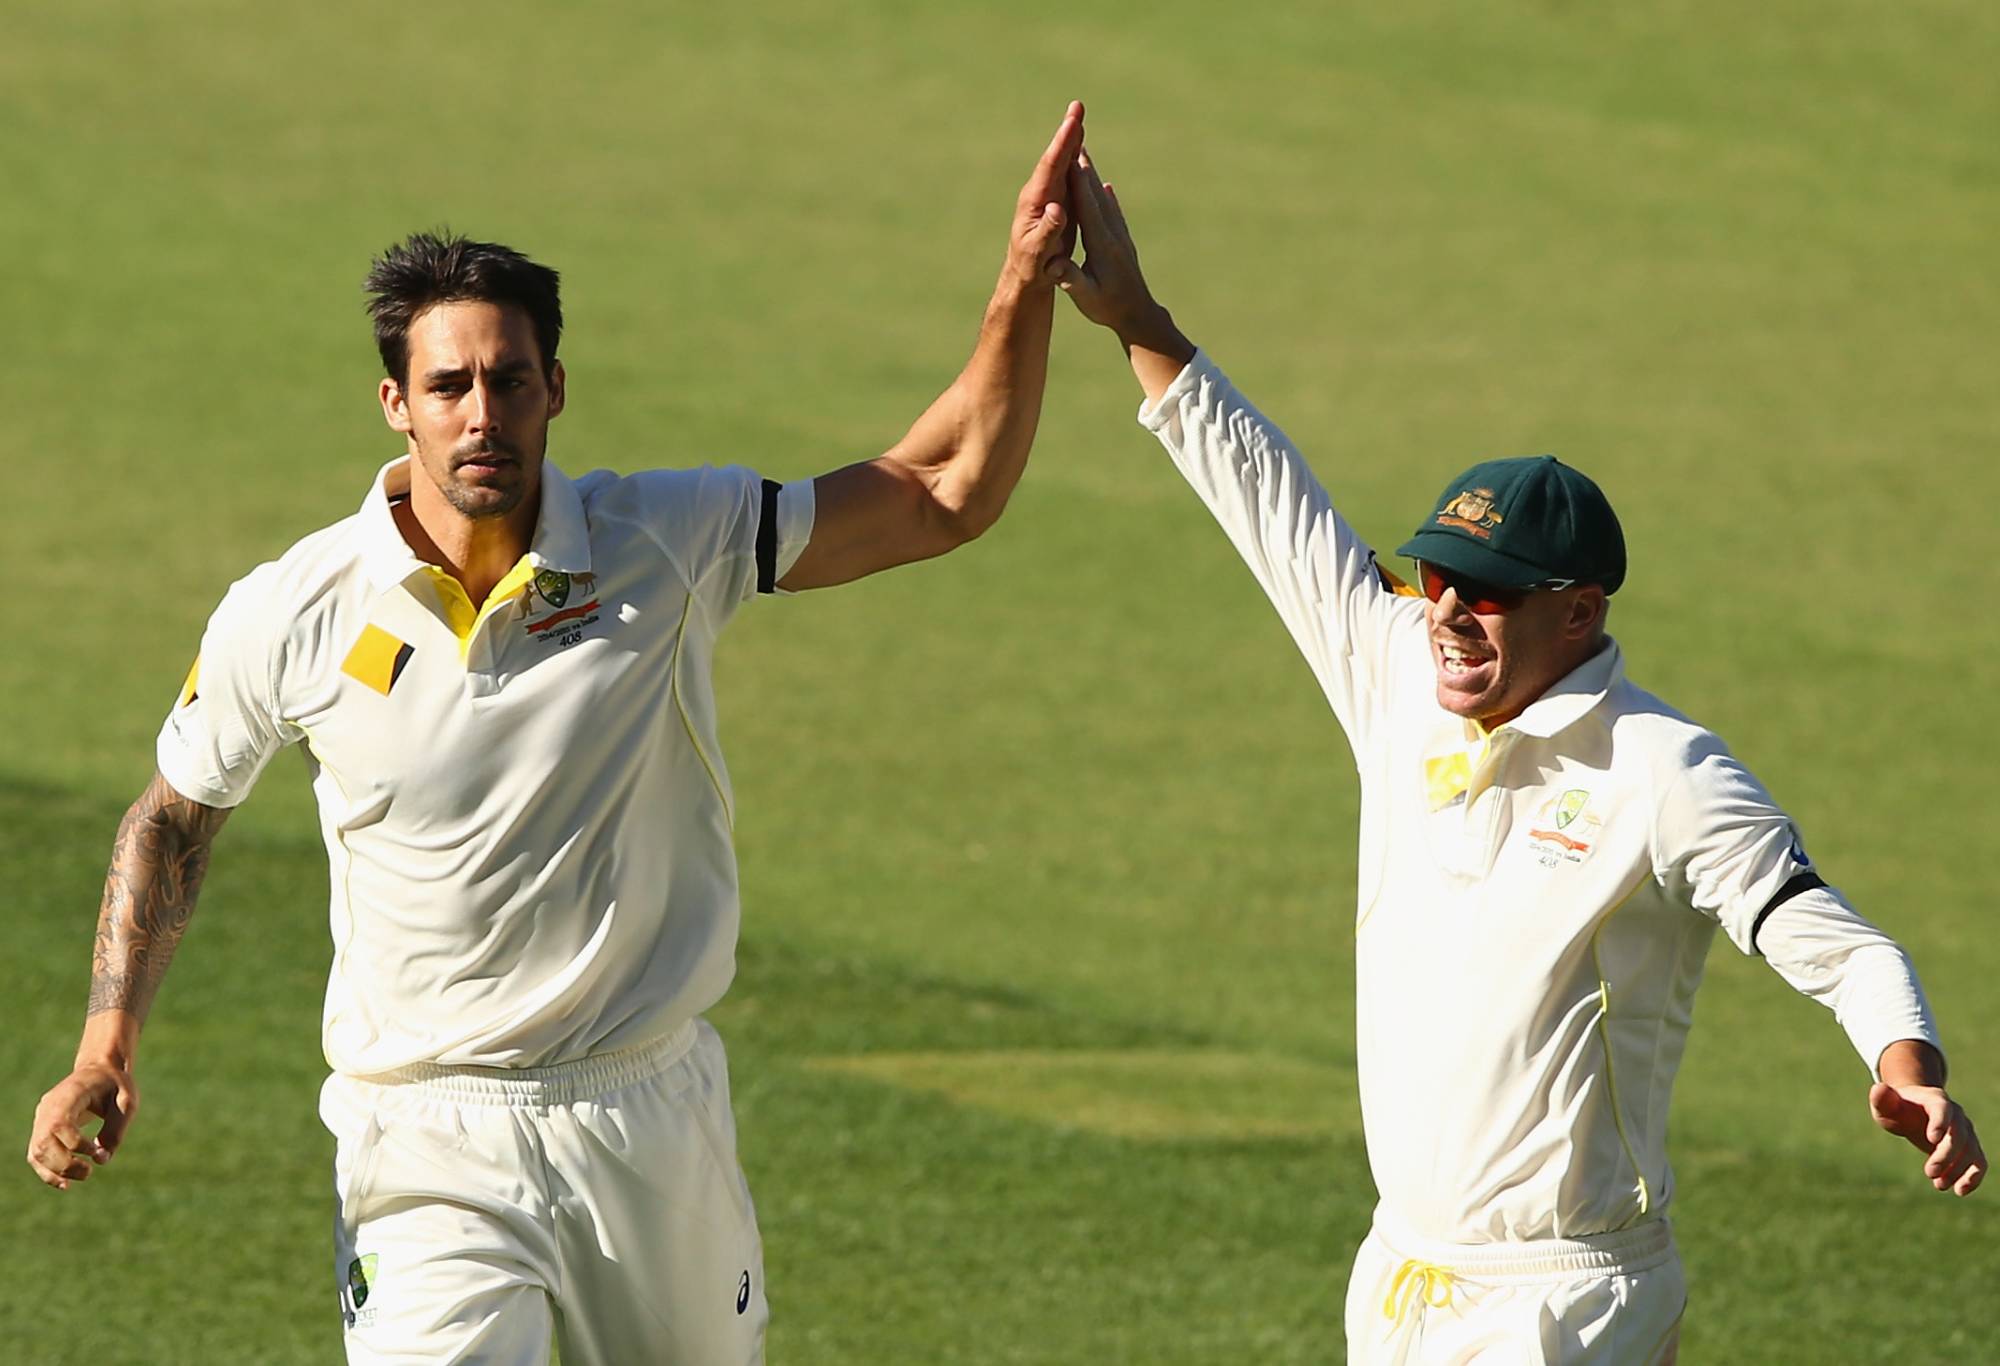 ADELAIDE, AUSTRALIA - DECEMBER 11: Mitchell Johnson and David Warner of Australia celebrate the wicket of Virat Kohli of India during day three of the First Test match between Australia and India at Adelaide Oval on December 11, 2014 in Adelaide, Australia. (Photo by Robert Cianflone/Getty Images)